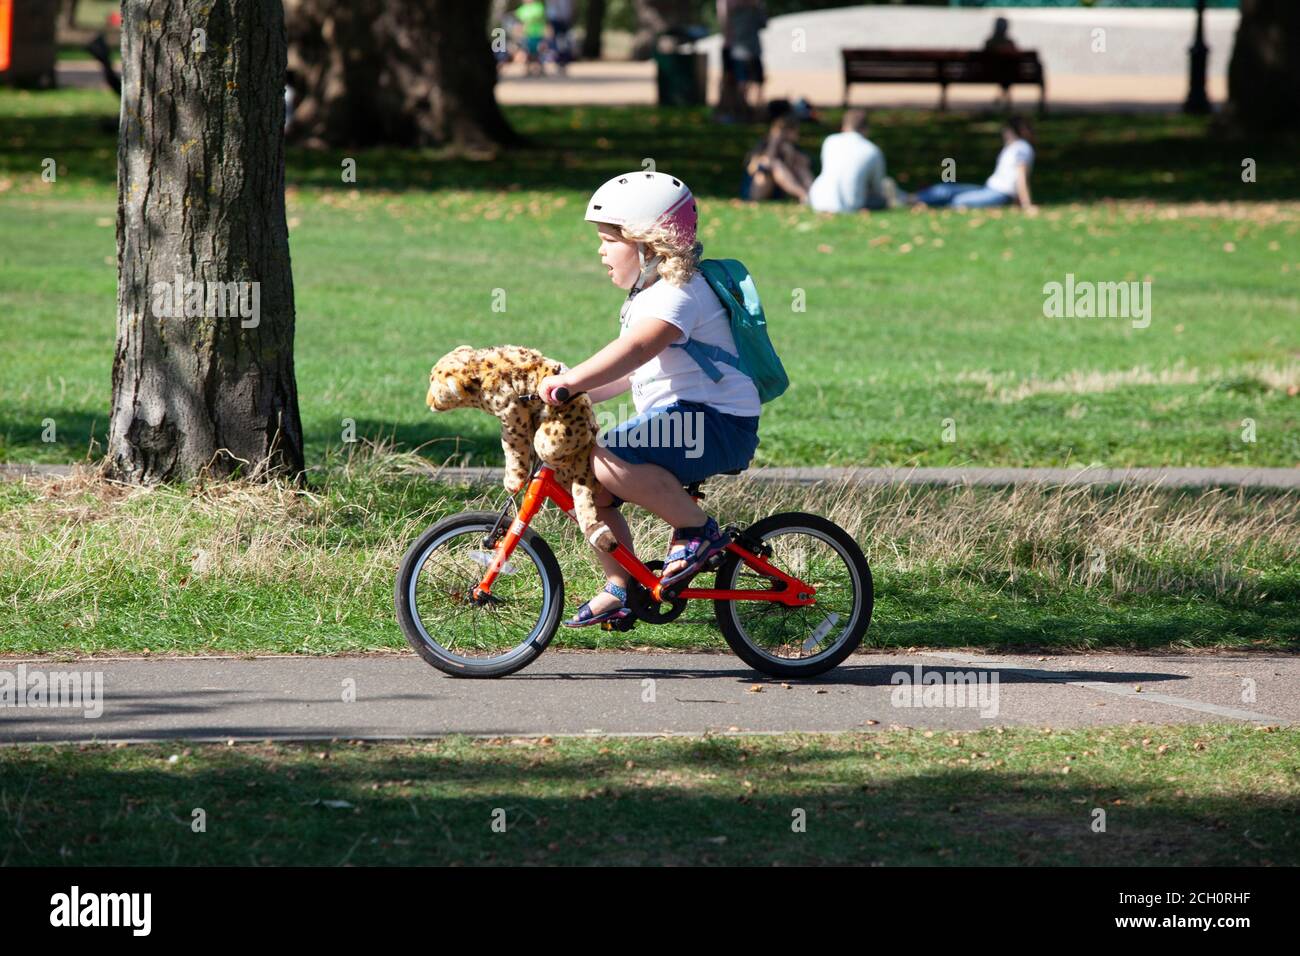 London, UK. 13 Sept 2020: Londoners took advantage of sunny weather to picnic and cycle on Clapham Common the day before social distancing rules will change. No government guildance has been issued on cycling with toy leopards. Anna Watson/Alamy Live news Stock Photo